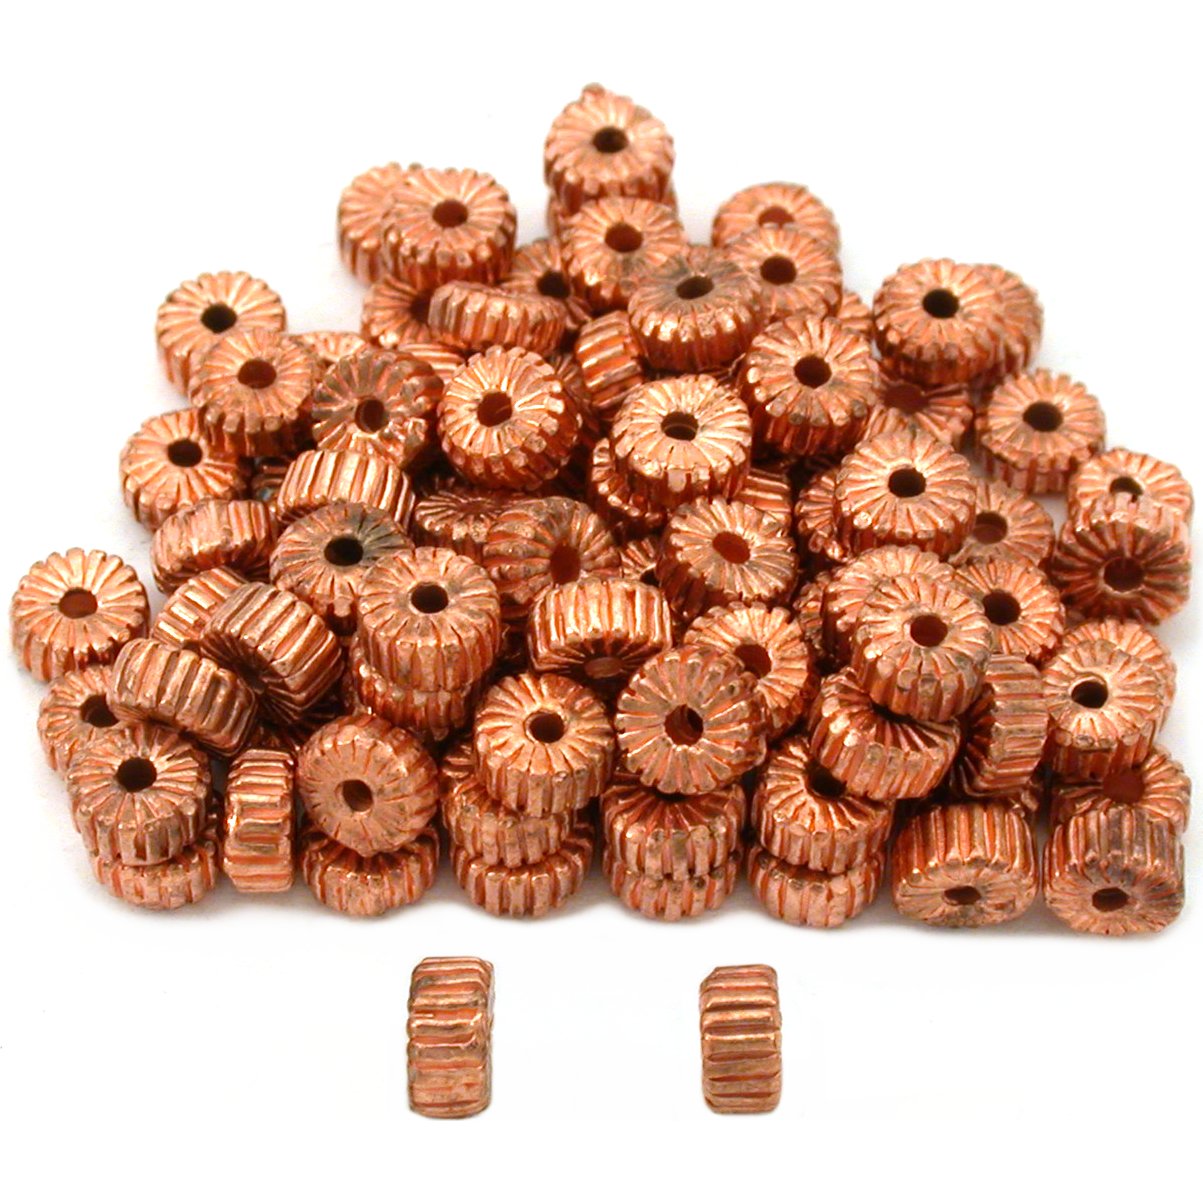 Spacer Bali Copper Plated Beads Jewelry 5mm Approx 100